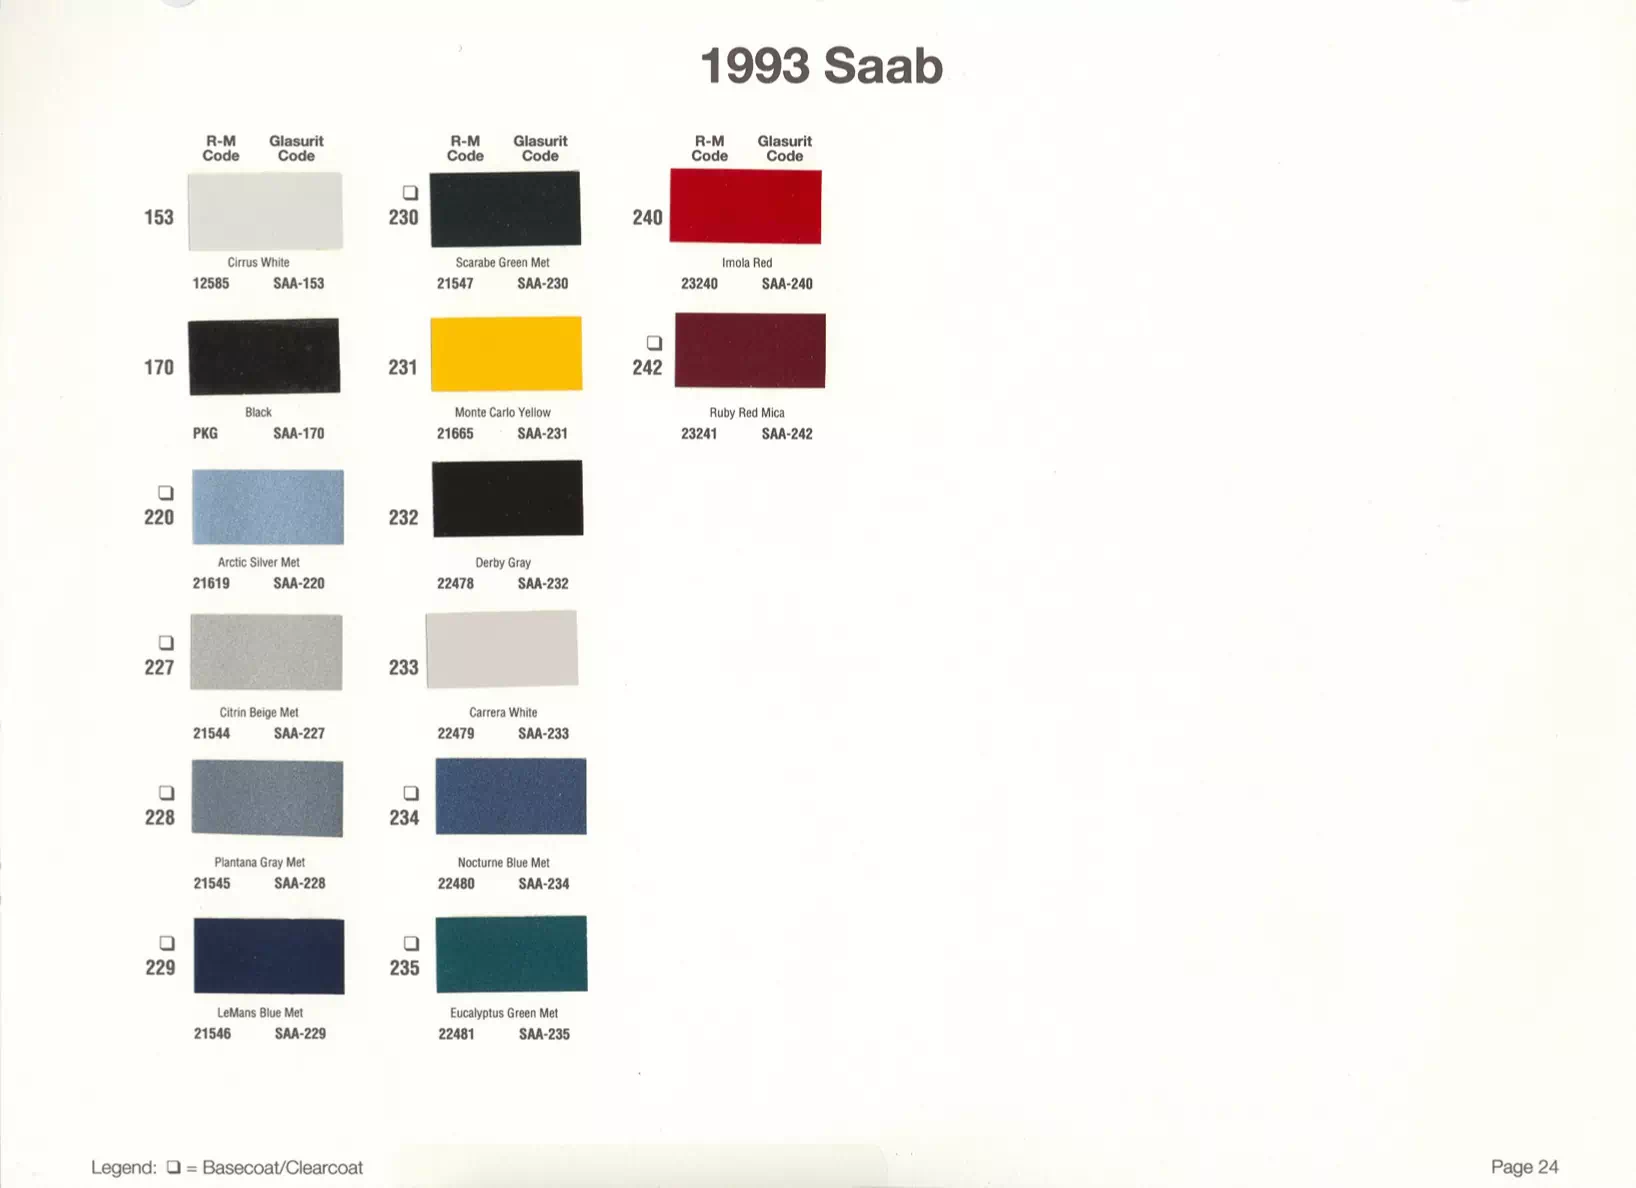 Paint chips of exterior paint colors for Saab vehicles and their ordering paint codes